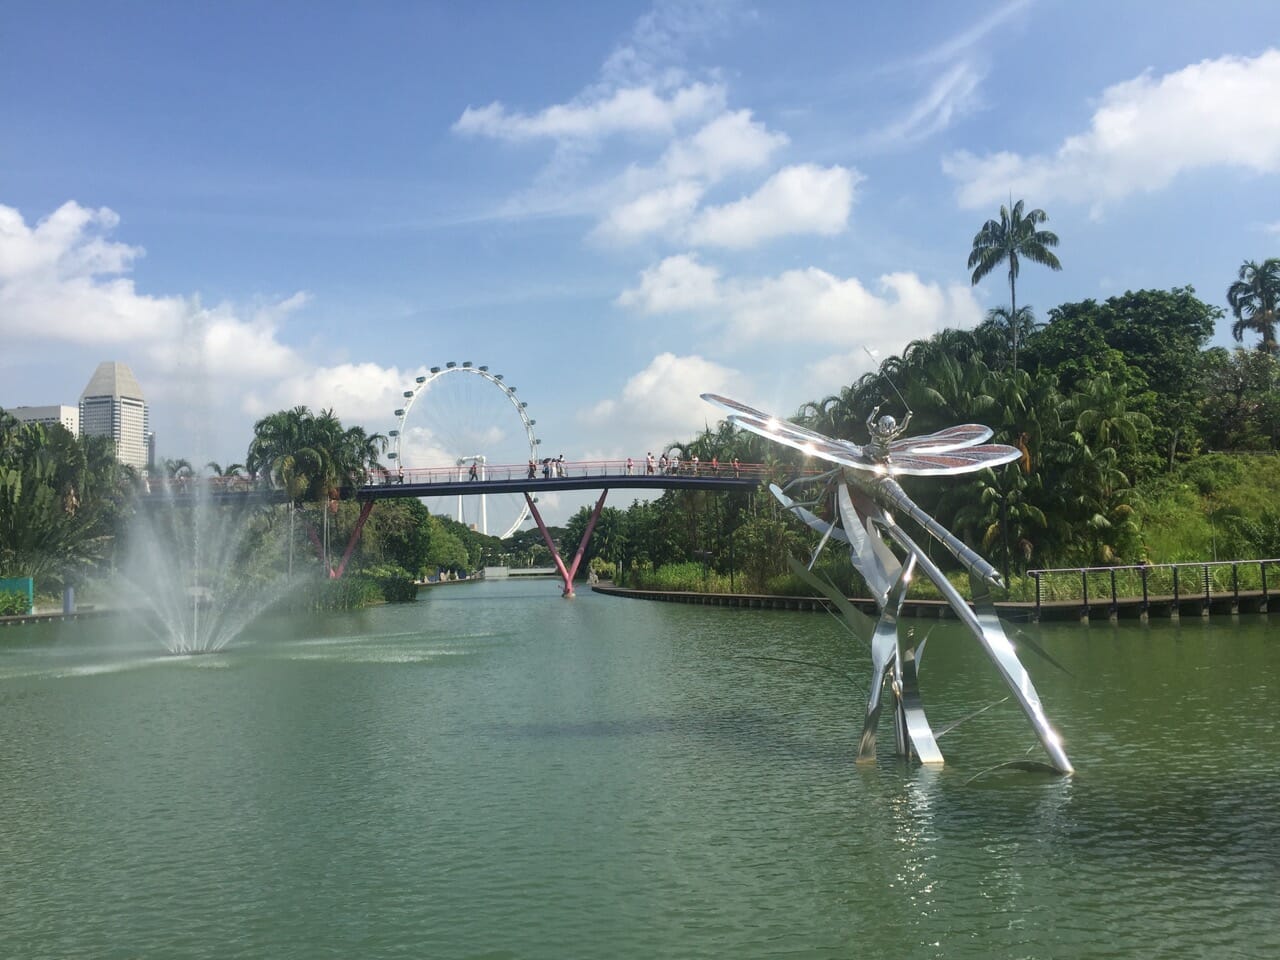 a lake with a silver dragon-fly scuplture, and a bridge in the background